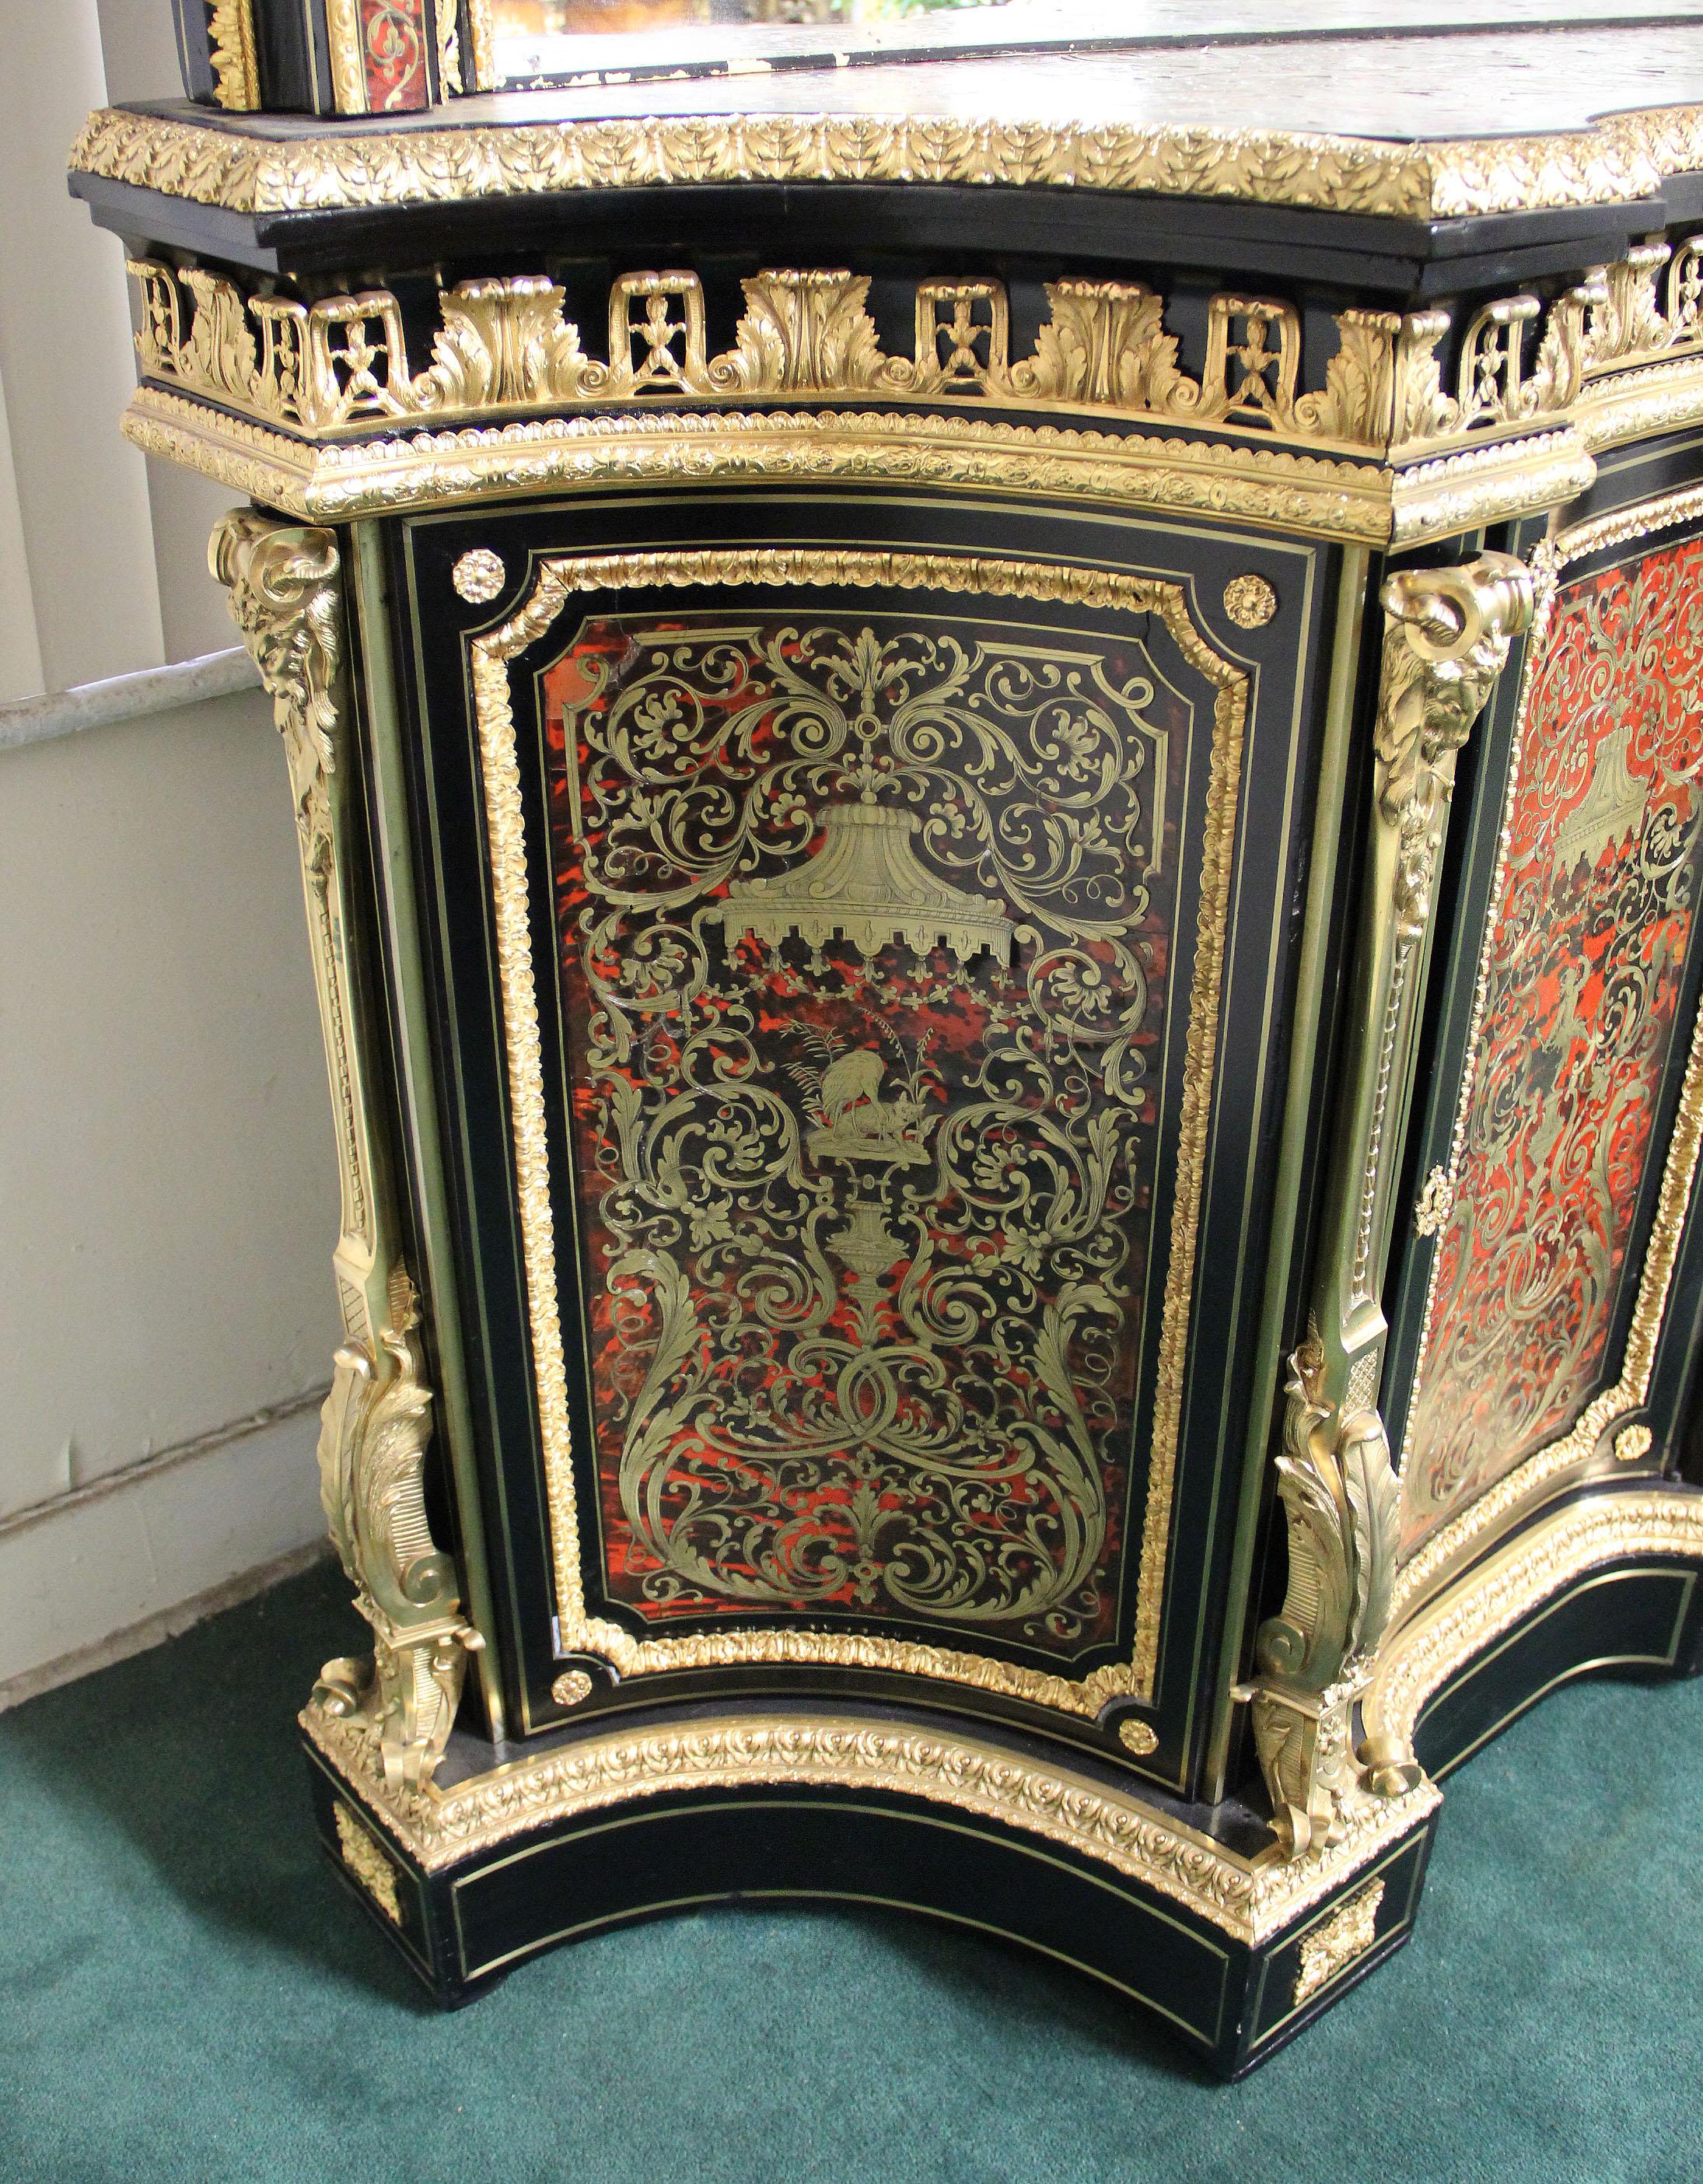 Belle Époque Mid-19th Century Napoleon III Gilt Bronze Mounted Boulle Style Cabinet & Mirror For Sale